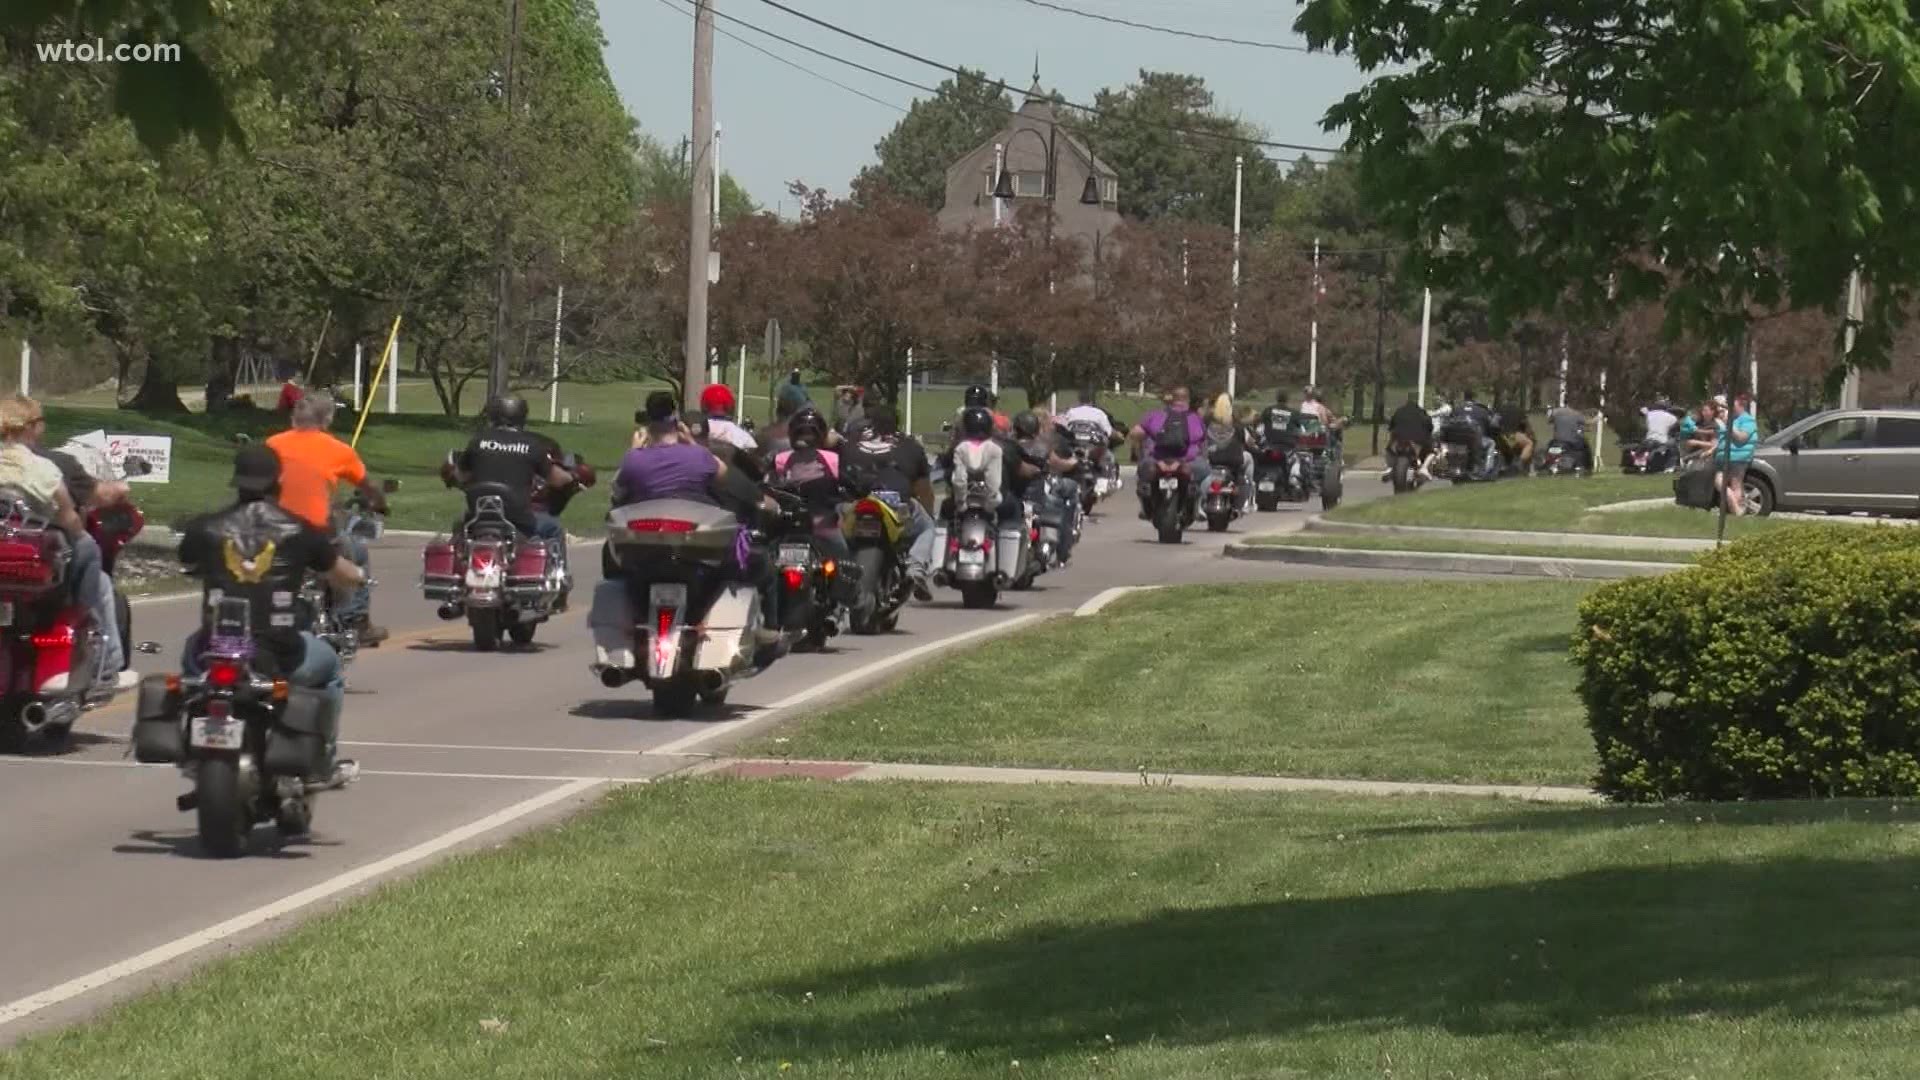 Hundreds of riders rode their bikes through the streets of Toledo to honor the life of 34-year-old Rachel Ciralsky, who died in a crash last June.